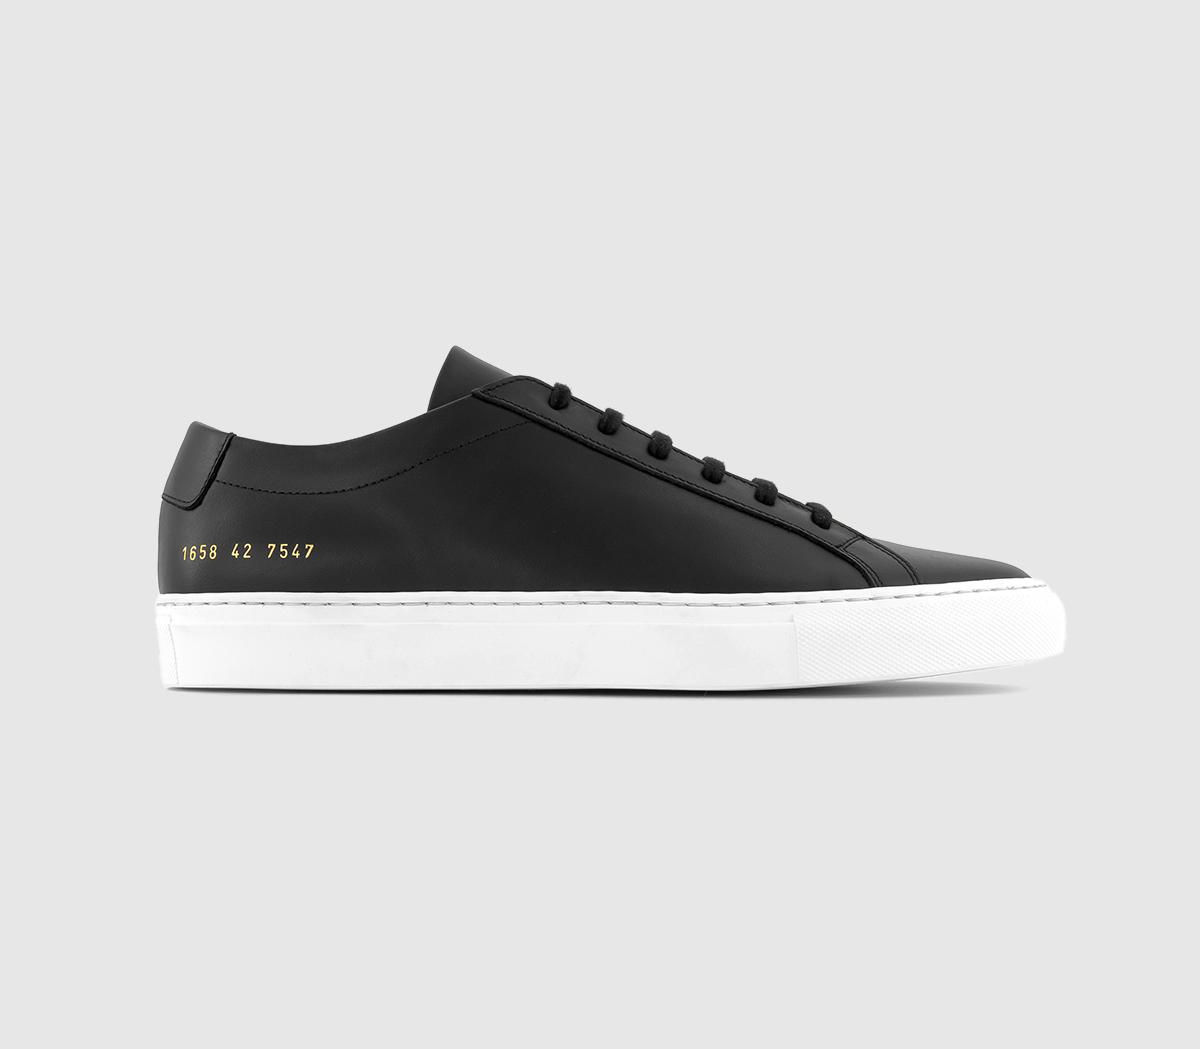 Common Projects Achilles Low Trainers Black White Leather - Women's ...